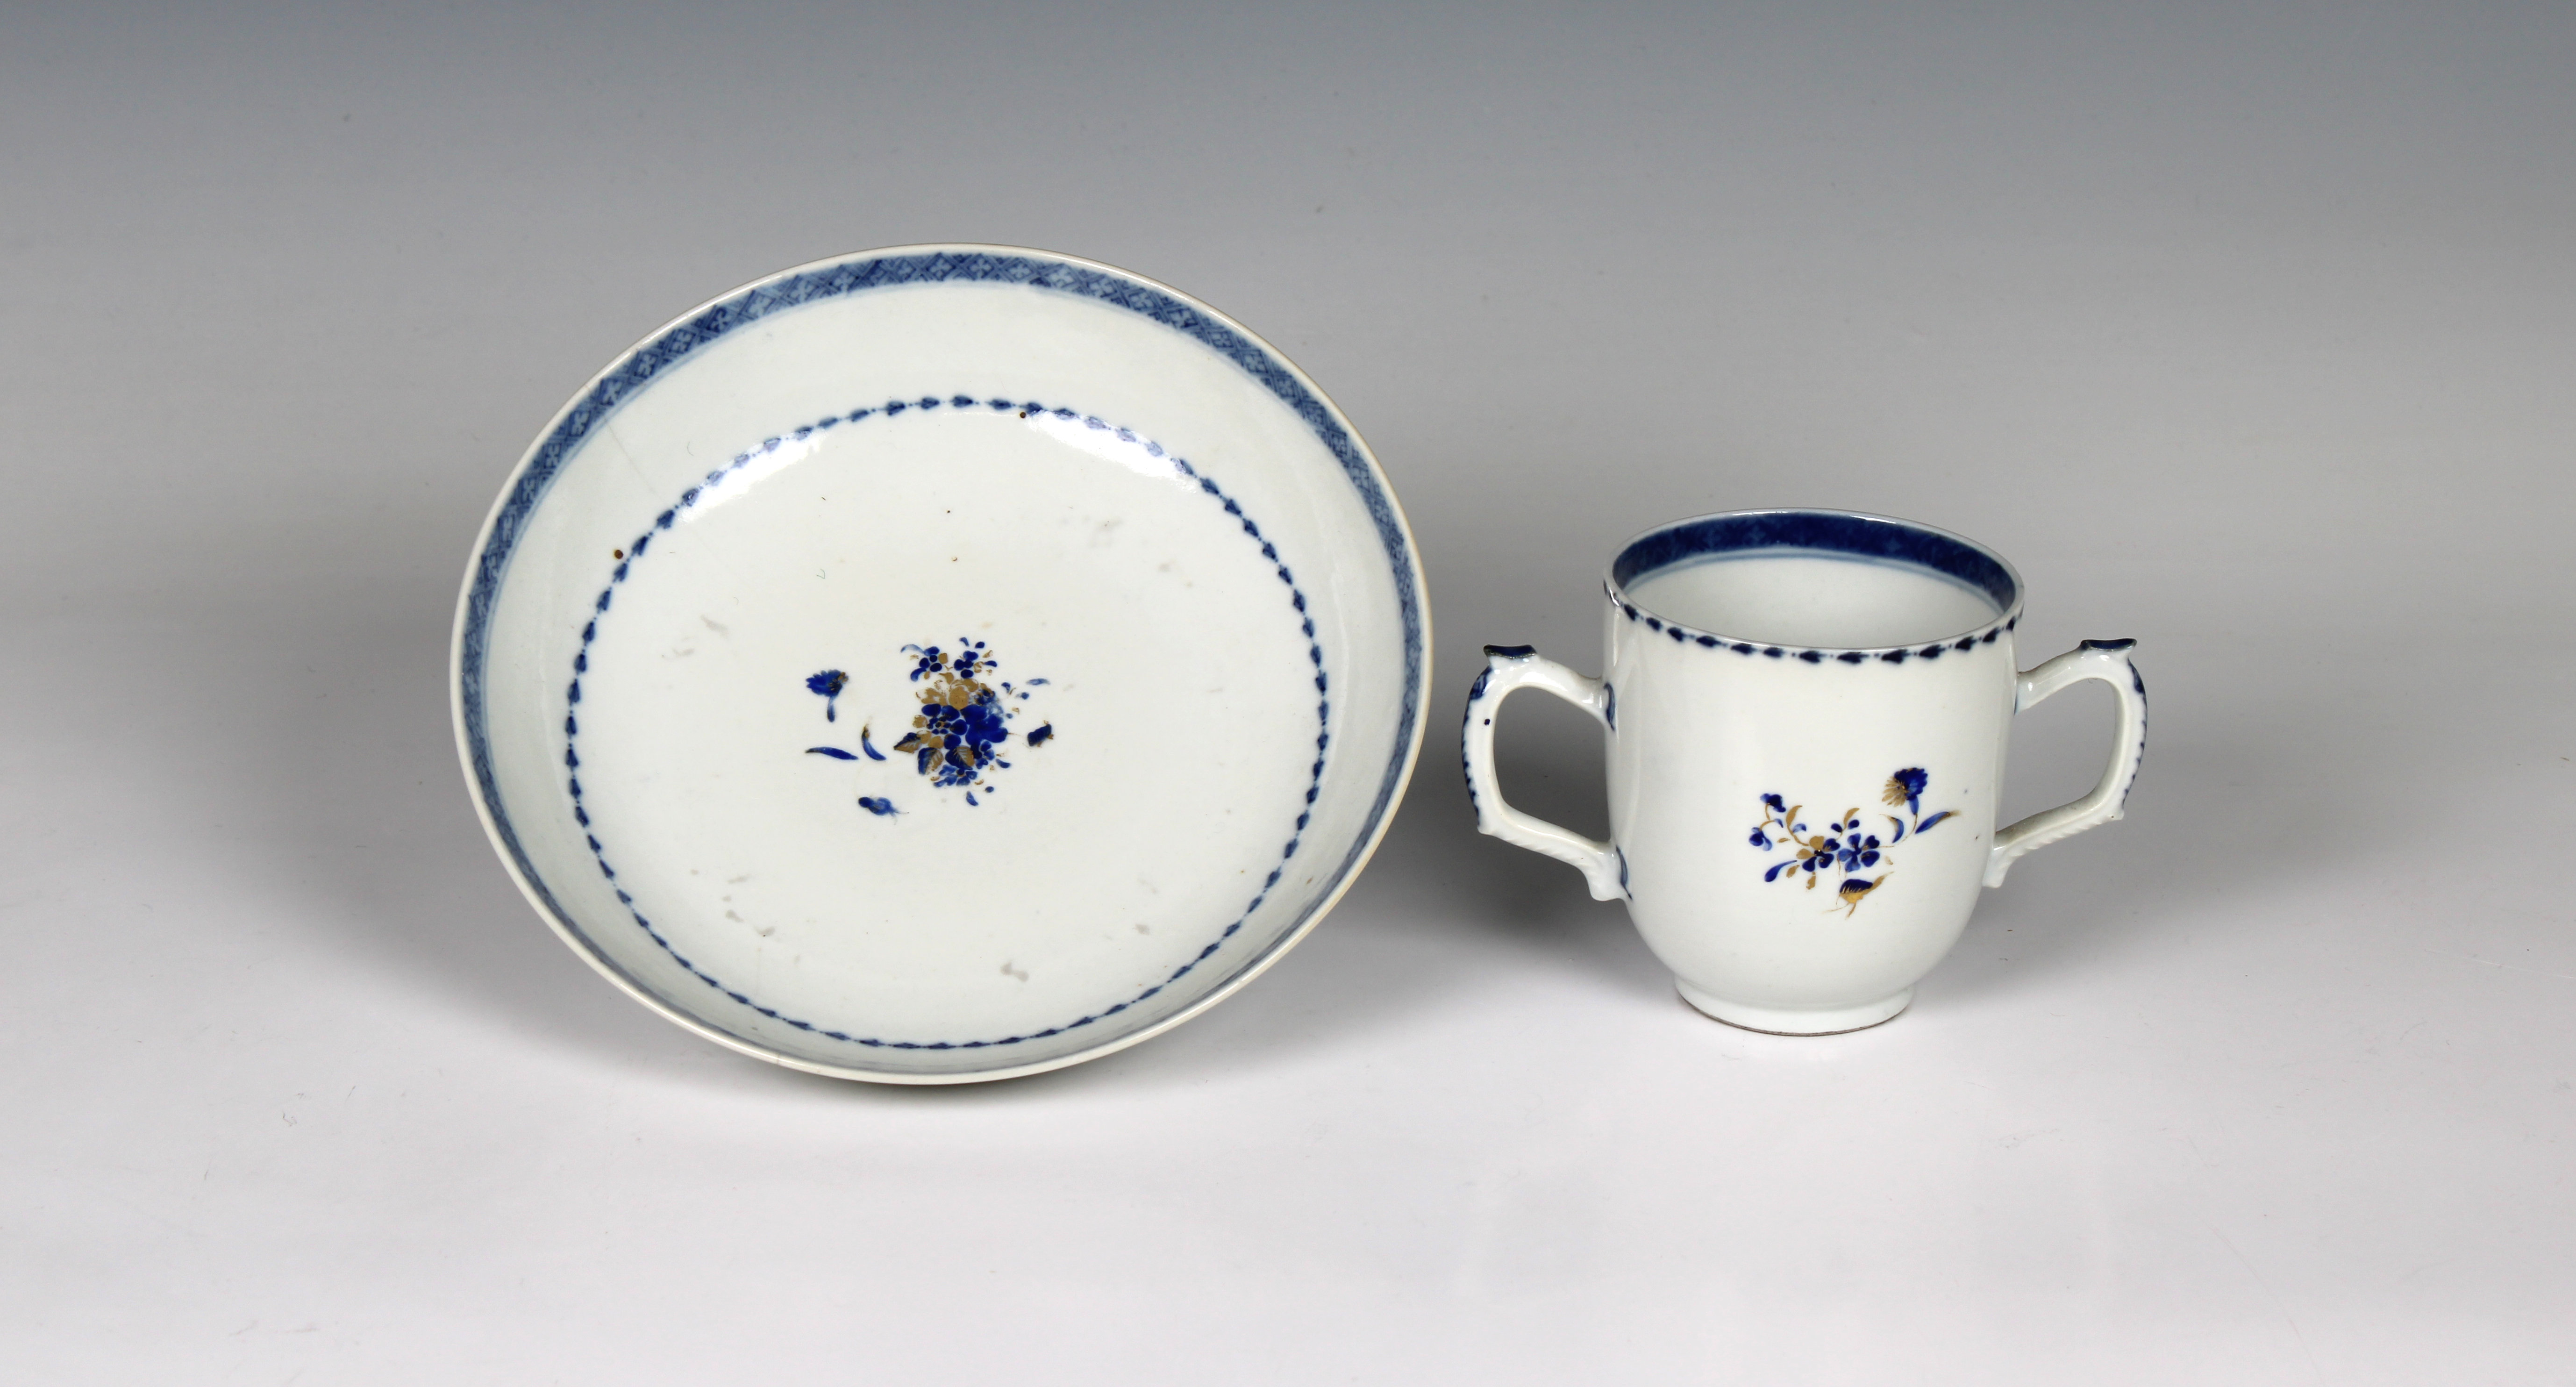 A Chinese export blue & white porcelain chocolate cup and saucer - Image 2 of 4